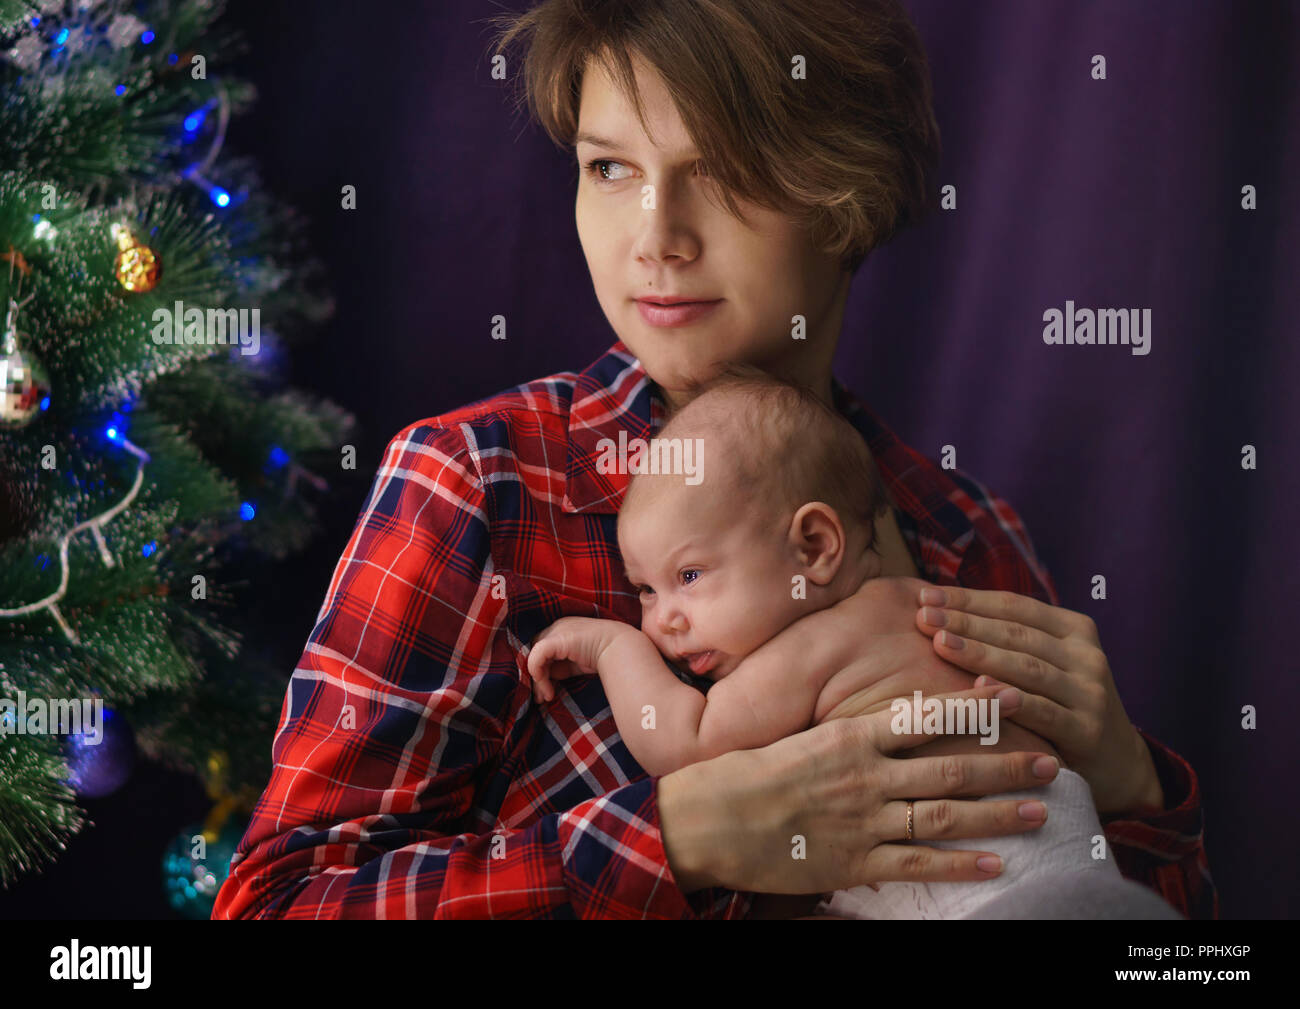 Family celebration. Portrait of young mother and newborn baby. In background Christmas tree. Happiness of motherhood. Stock Photo